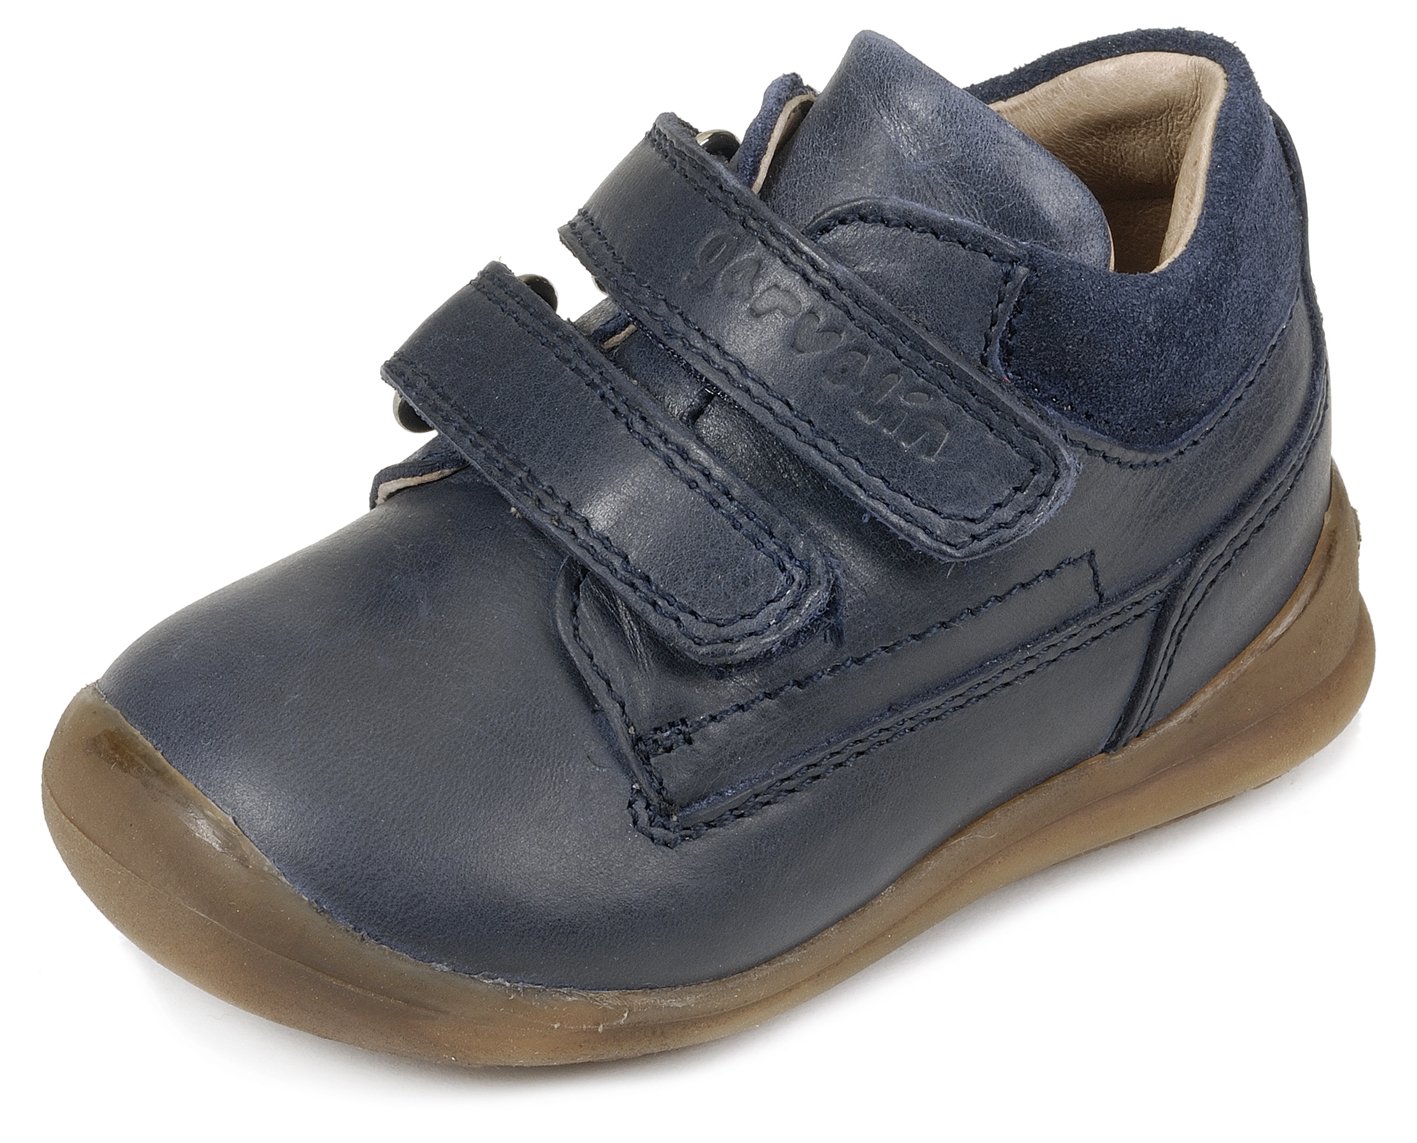 Boys Velcro Benito Shoe - Boys-First Walkers : Final Clearance on Now ...